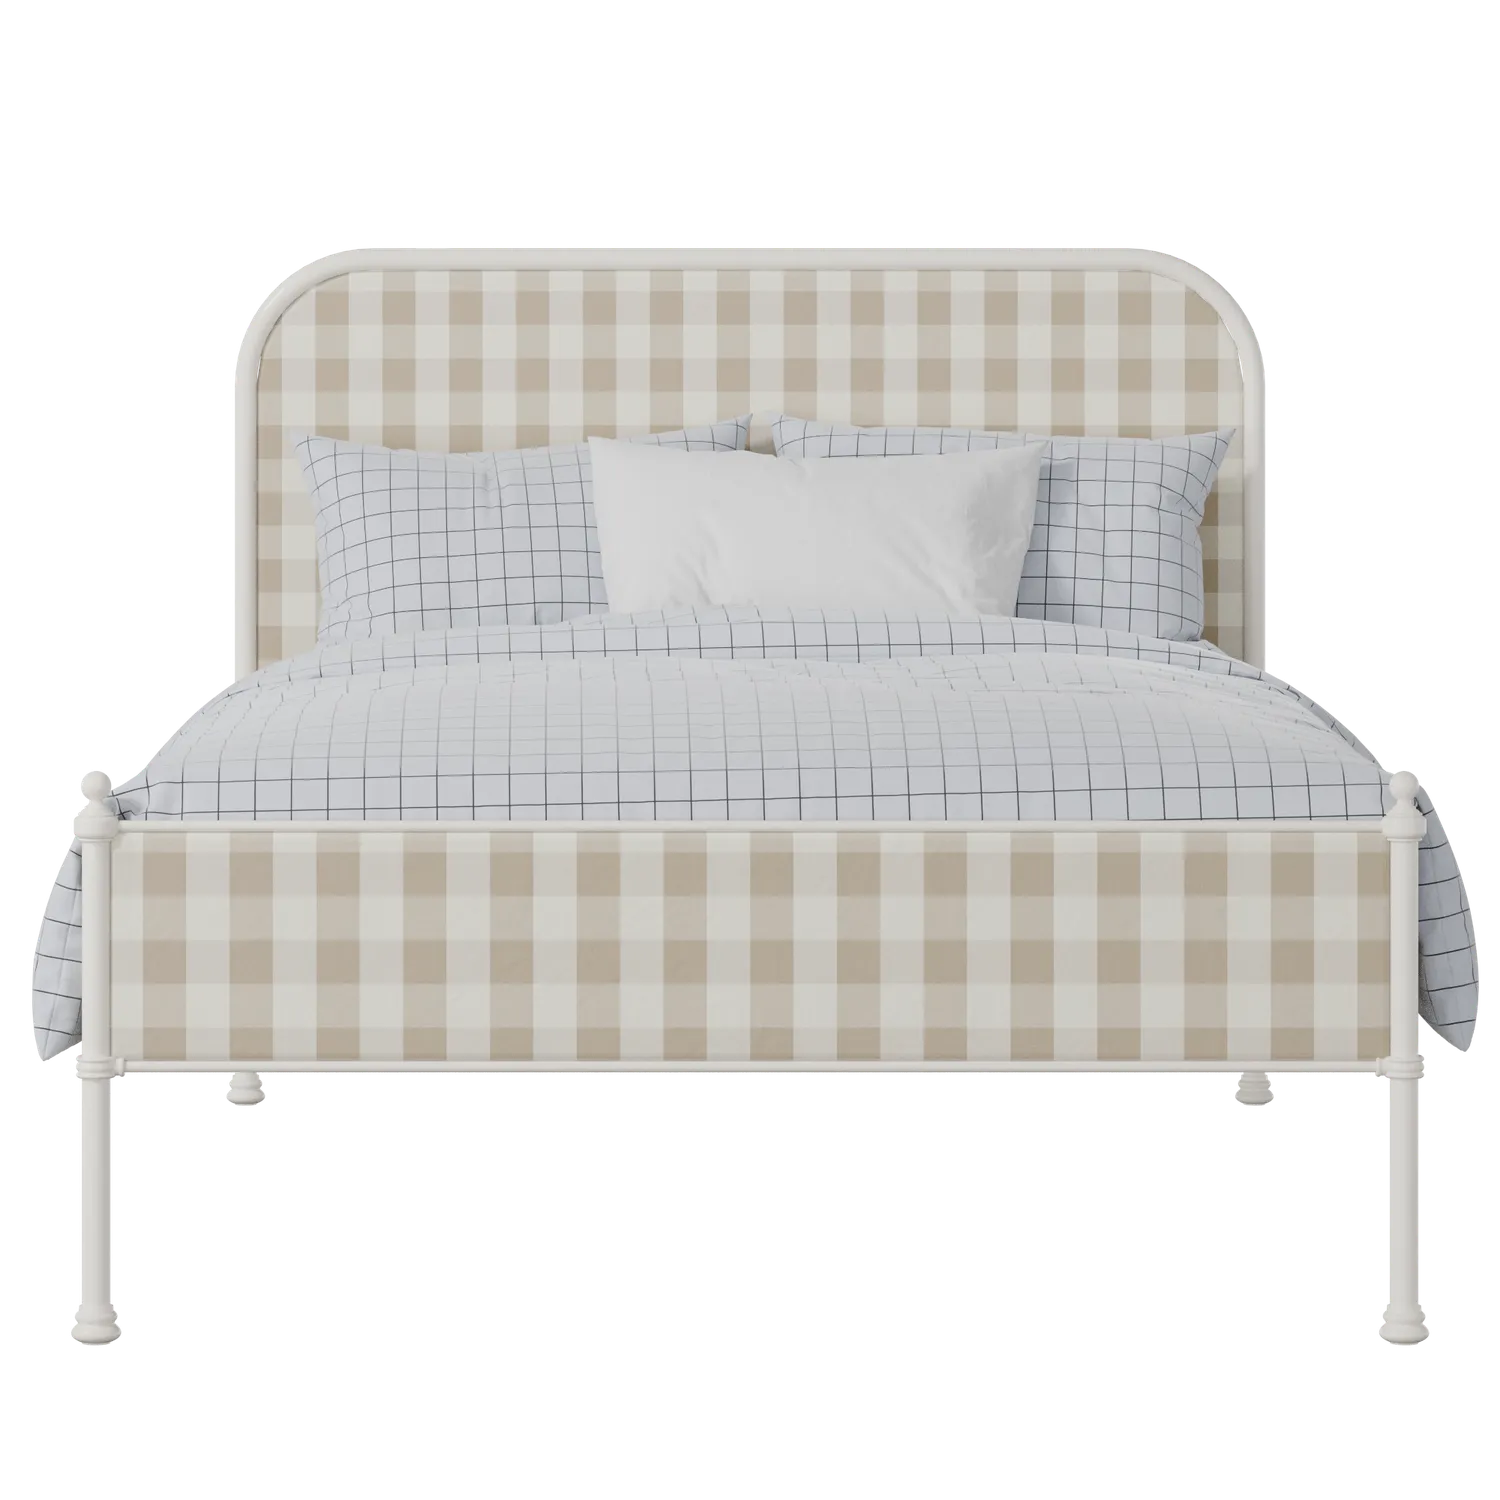 Bray Slim iron/metal upholstered bed in ivory with grey fabric